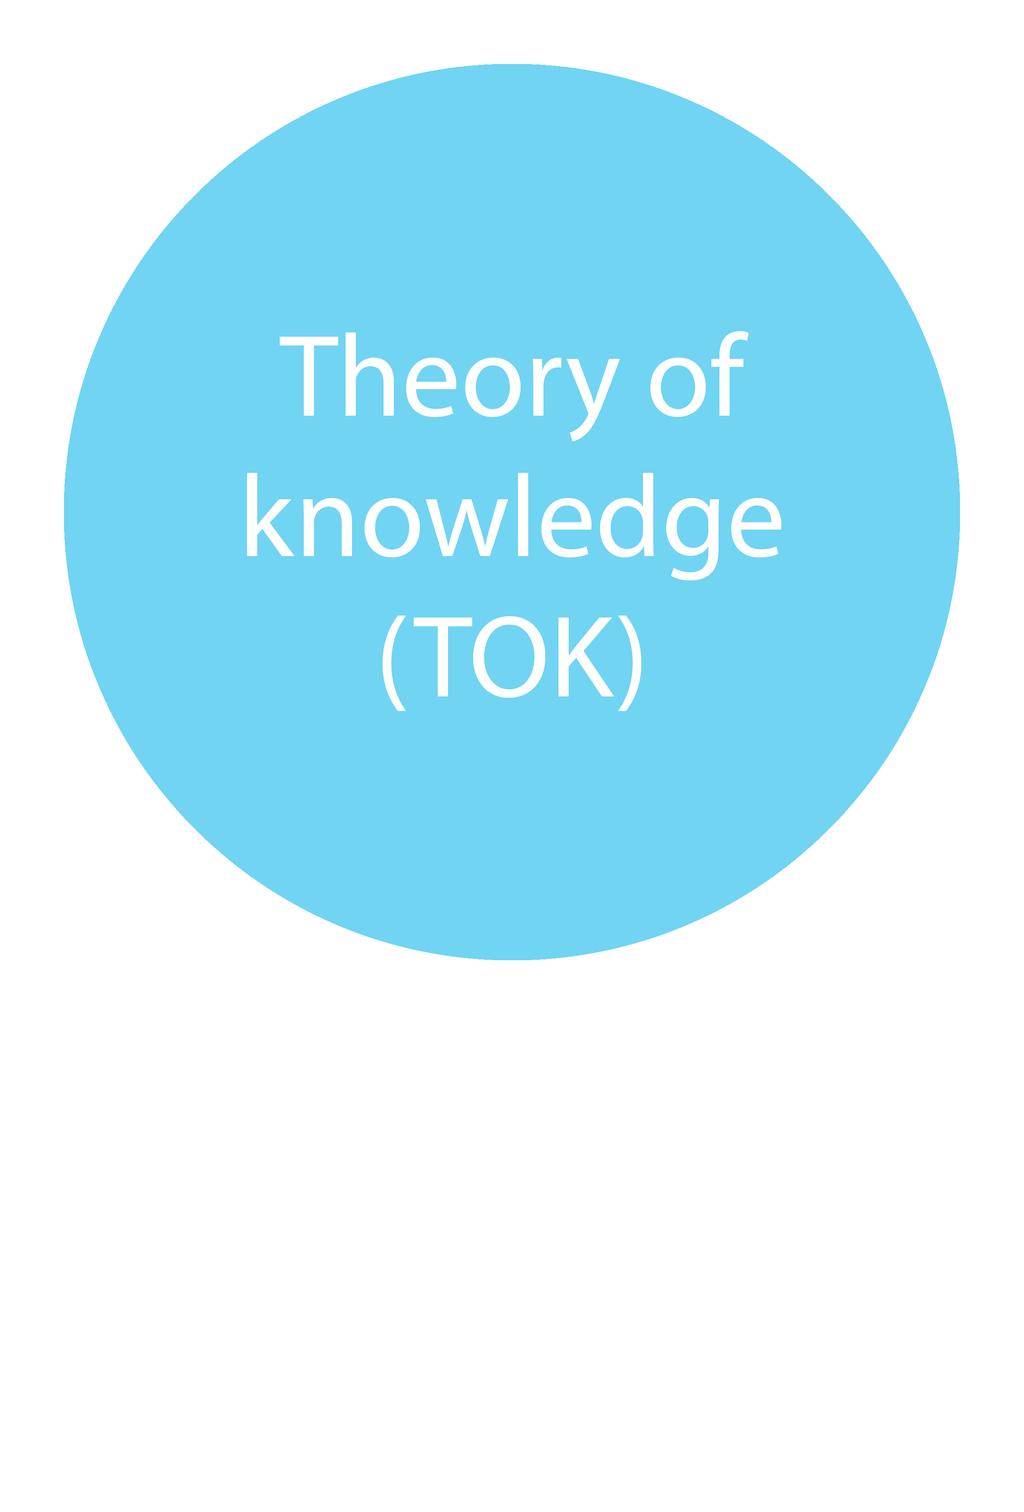 Reflection in TOK: TOK is about reflecting on the nature of knowledge.